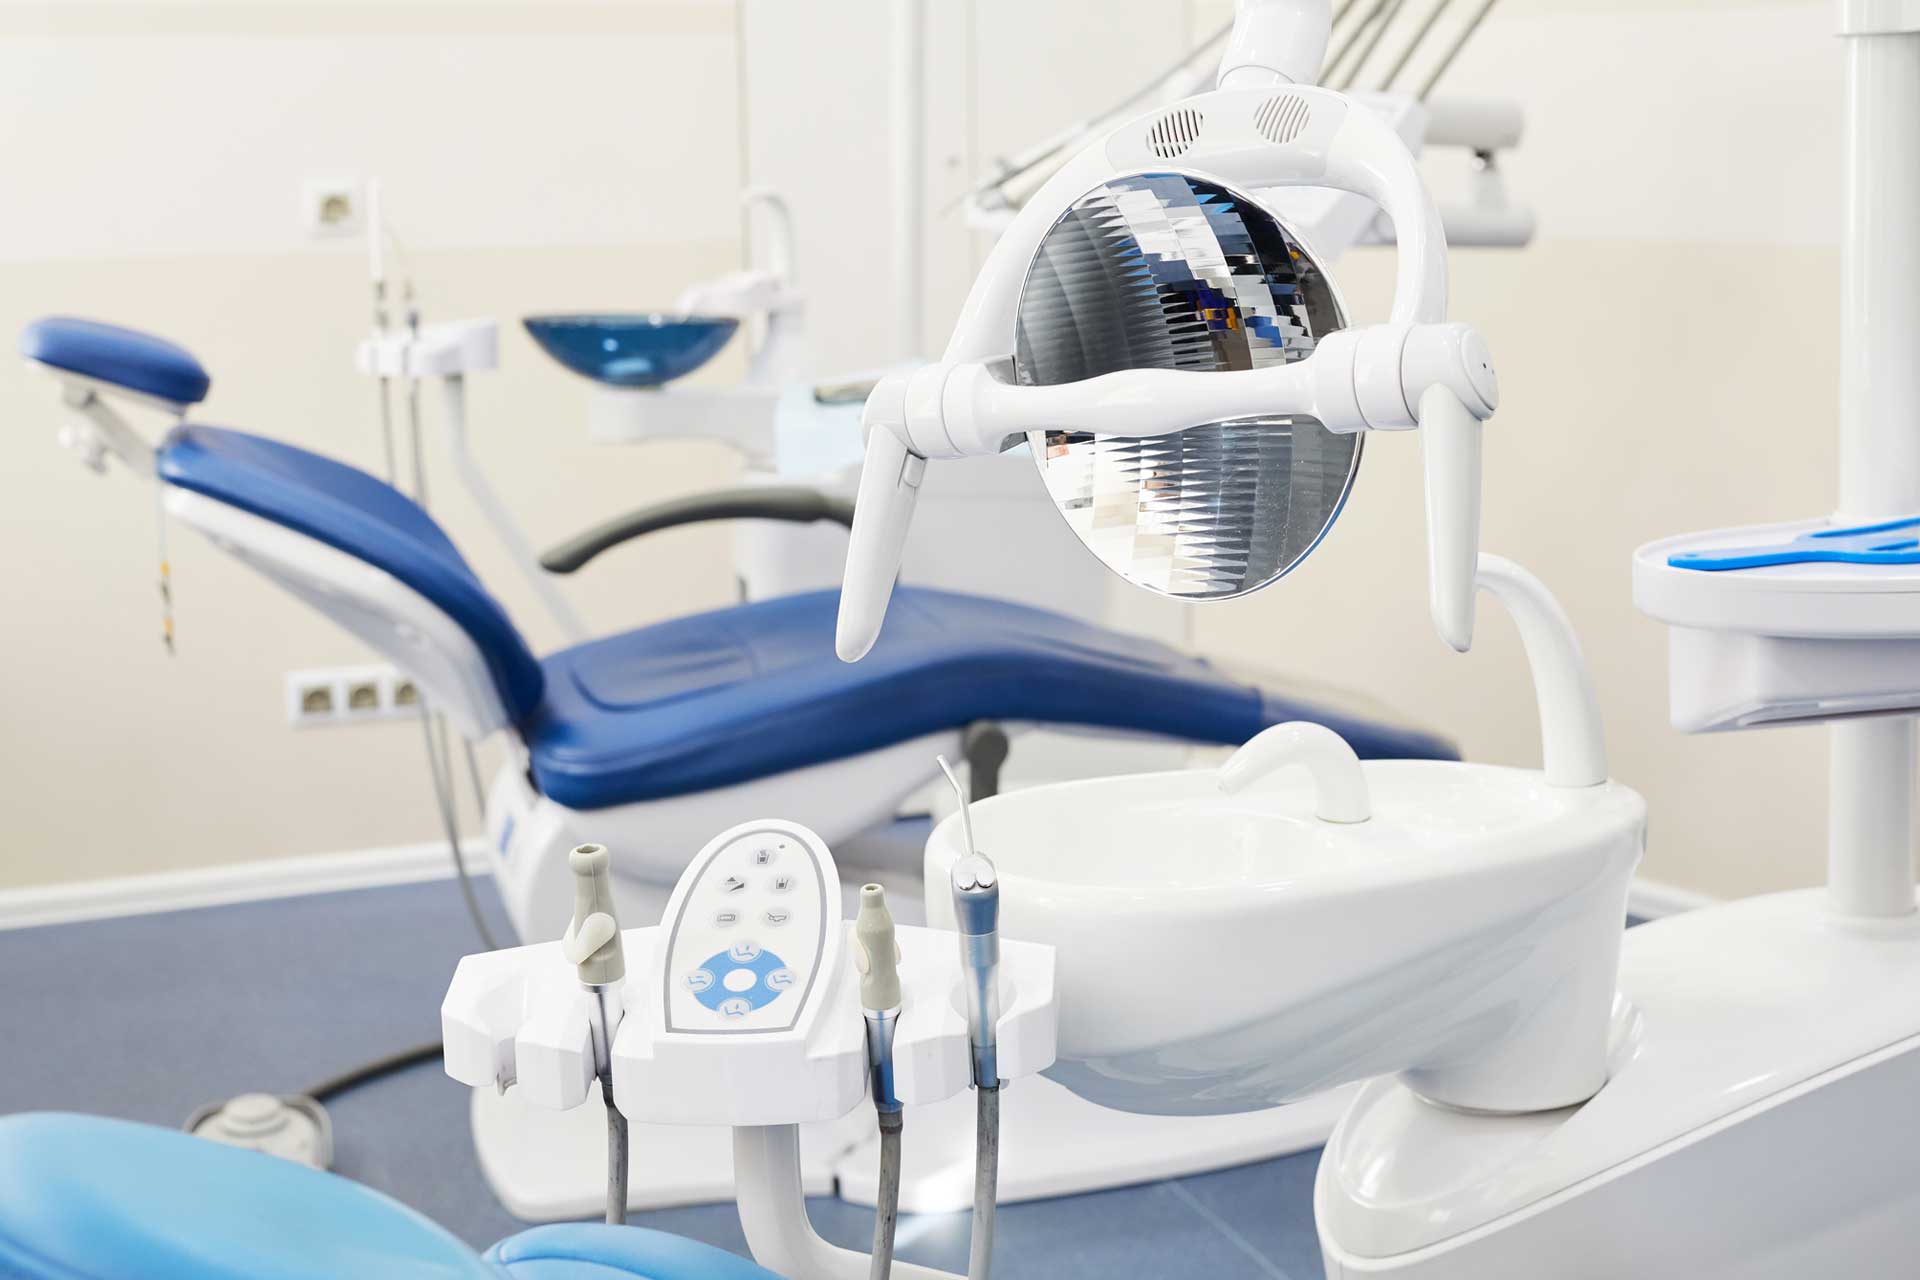 Dental Care and dental equipment in office